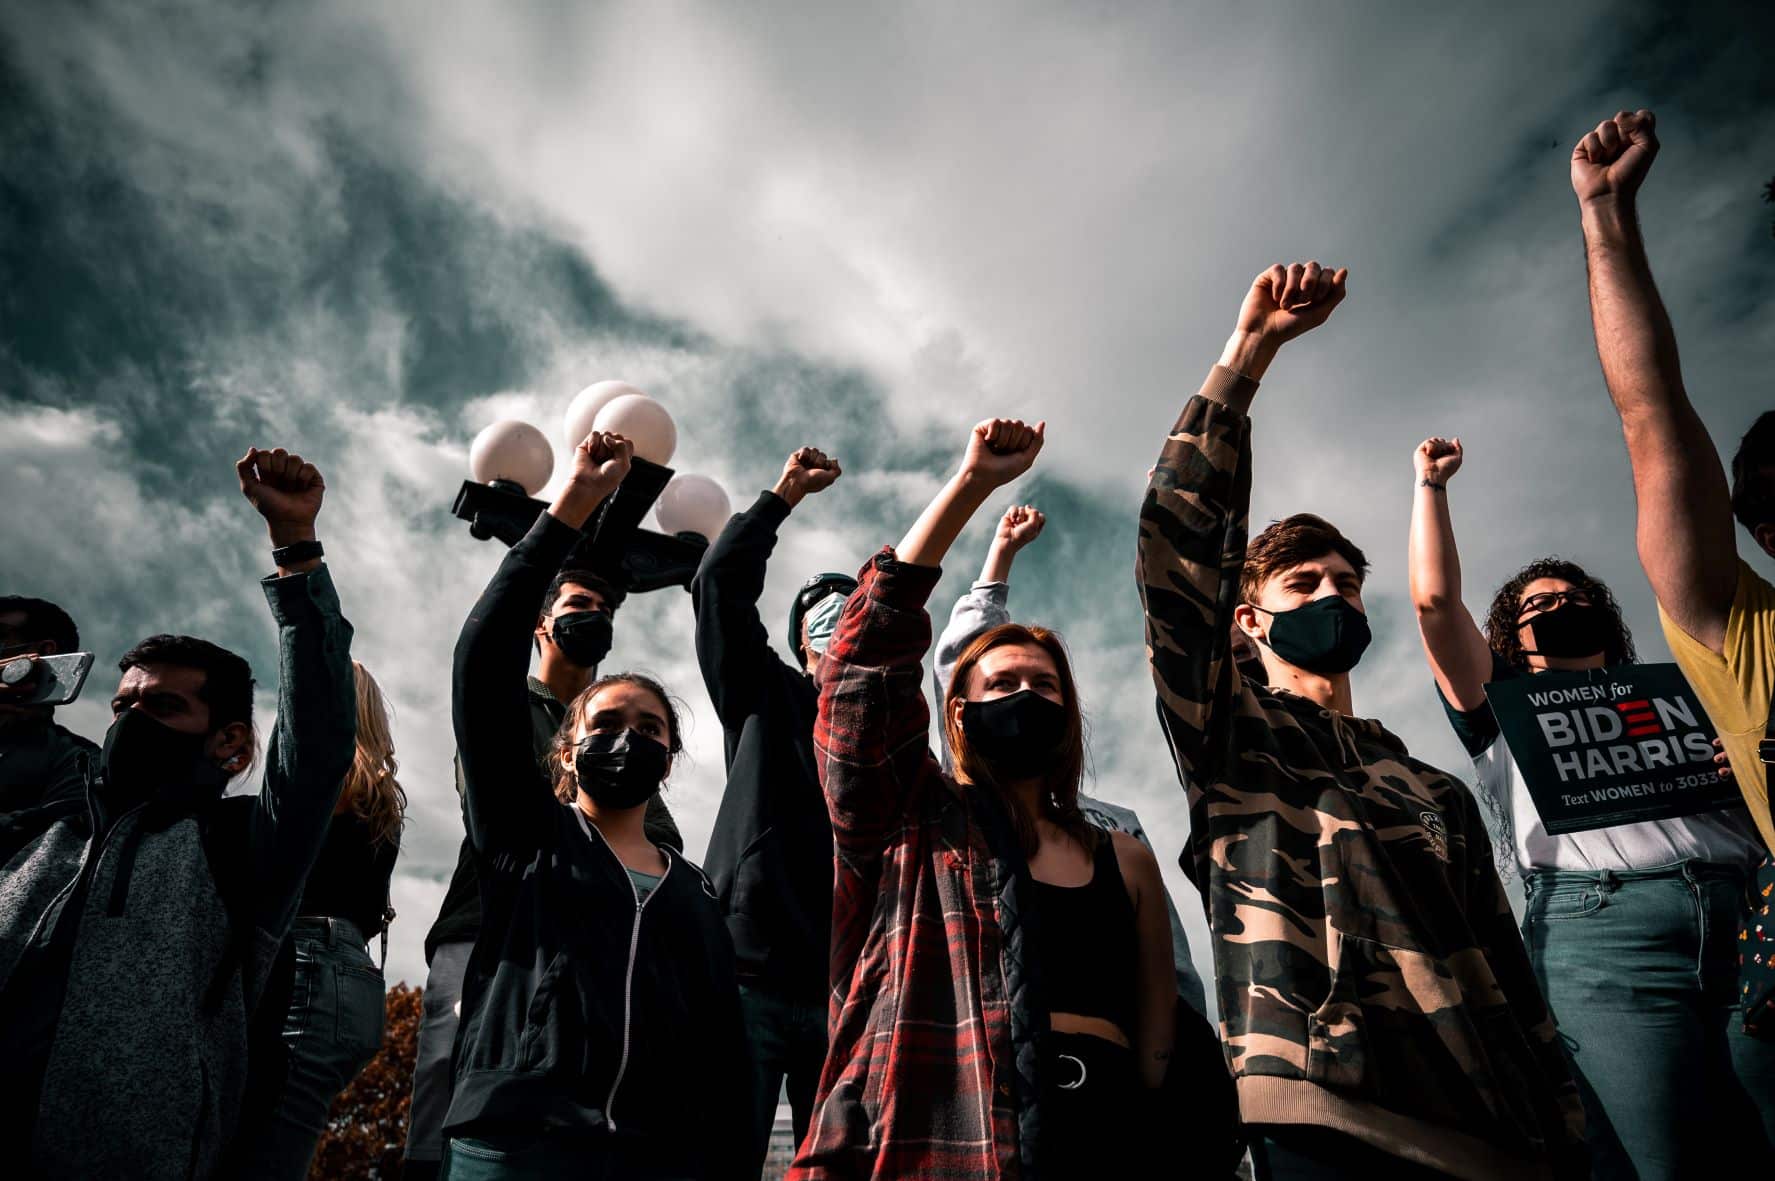 group of people with masks holding political signs and raising their fists in the air